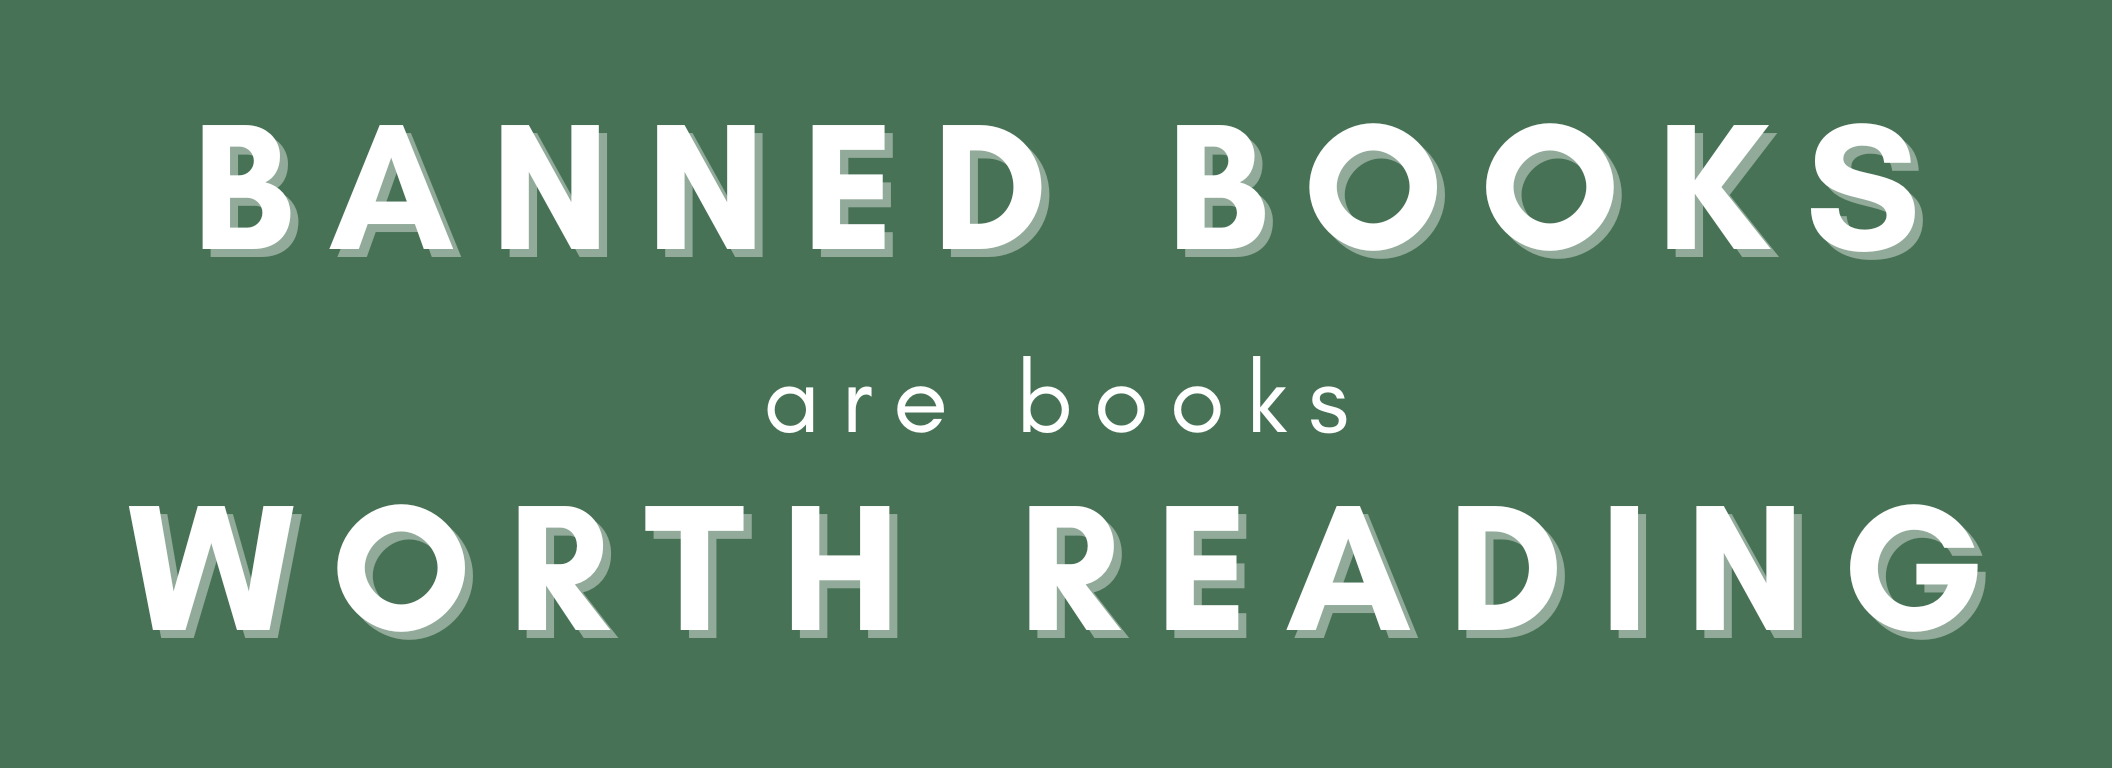 Banned books are books worth reading